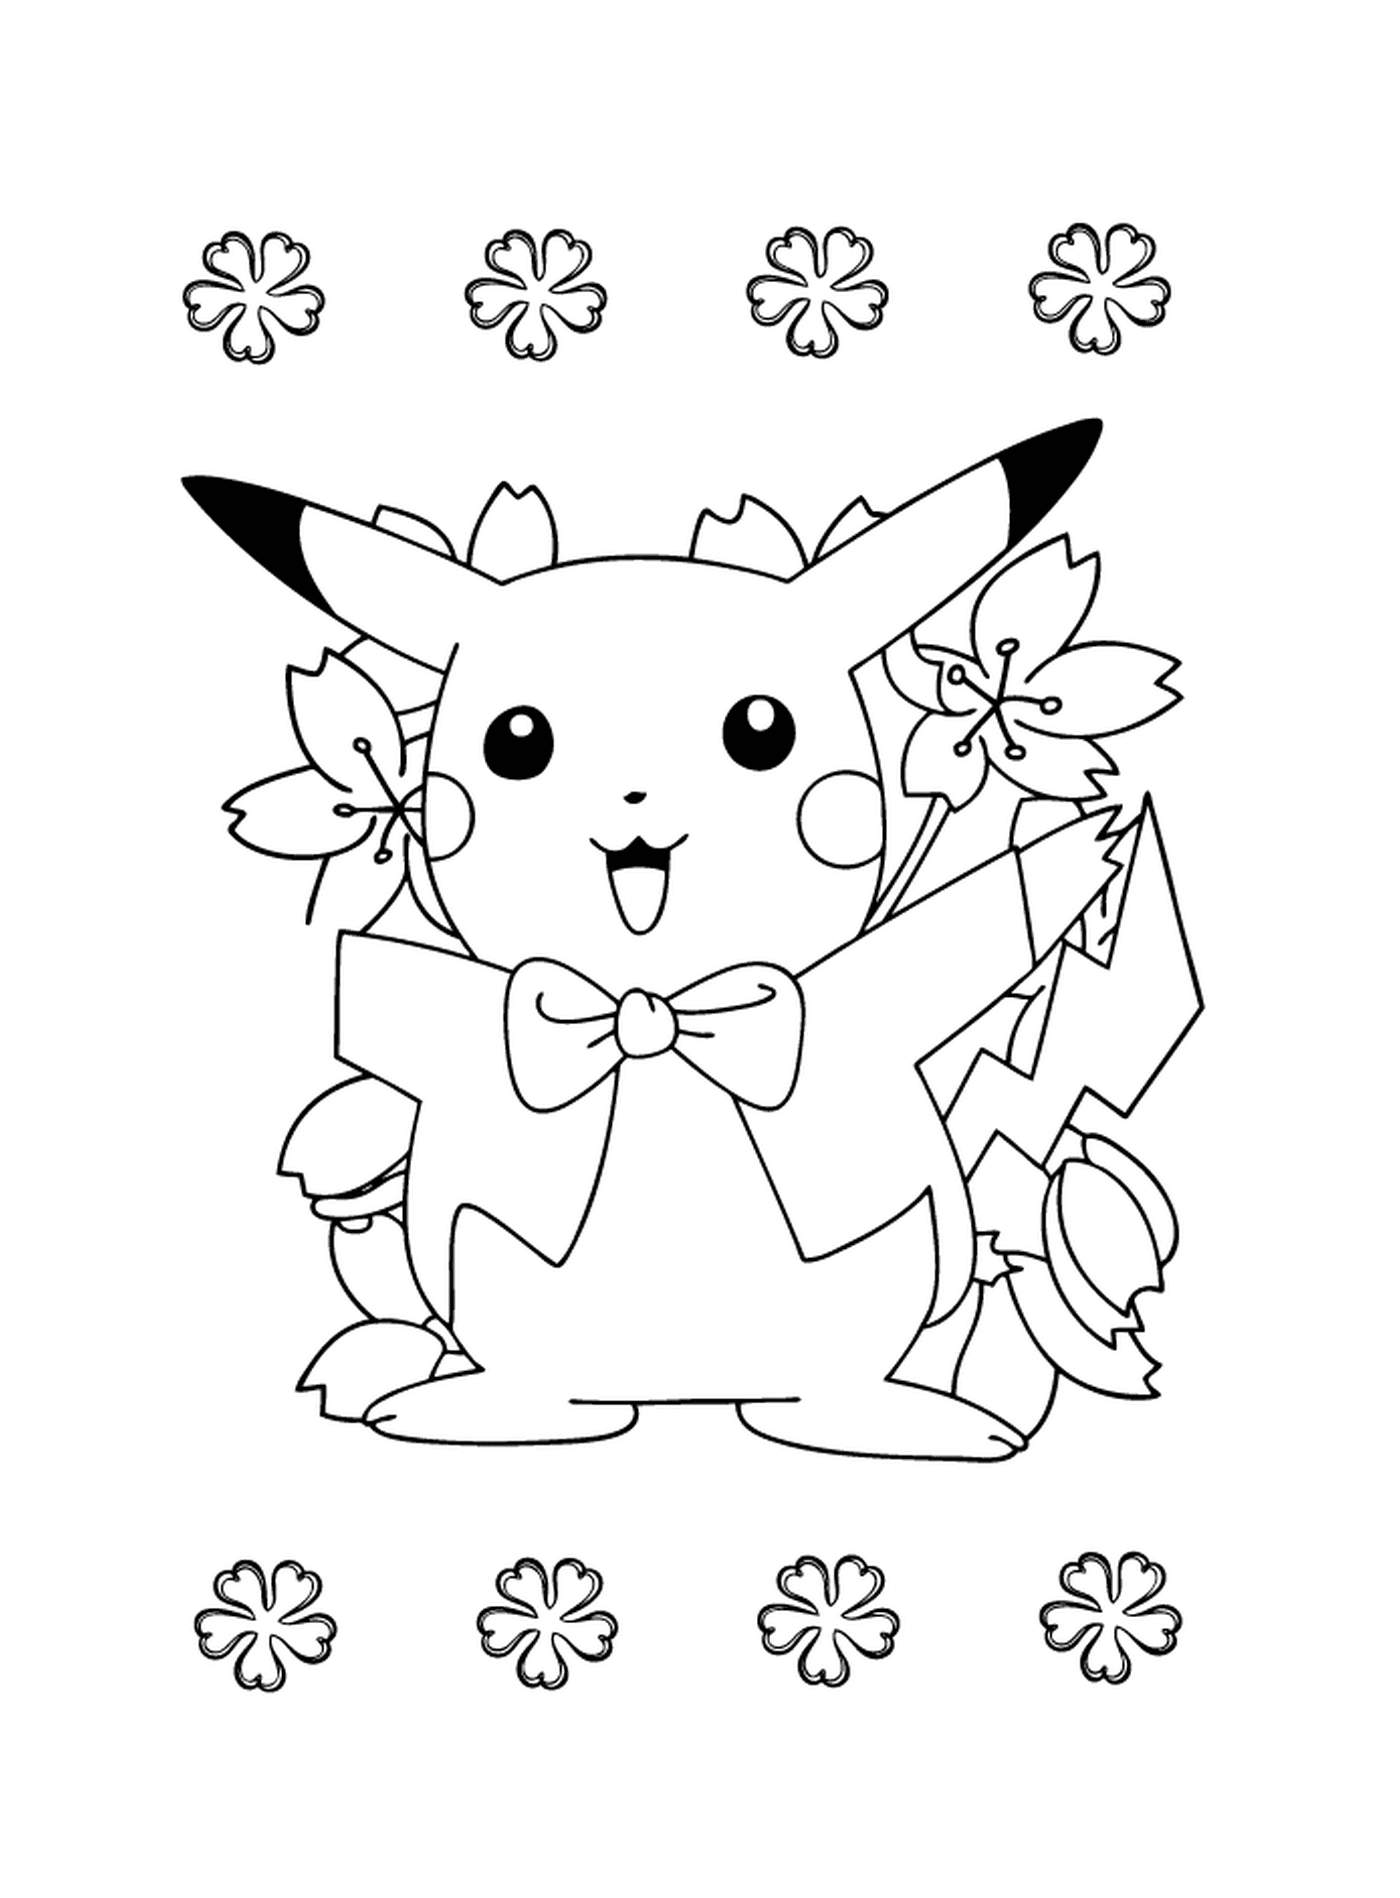  Pikachu with a specific expression 